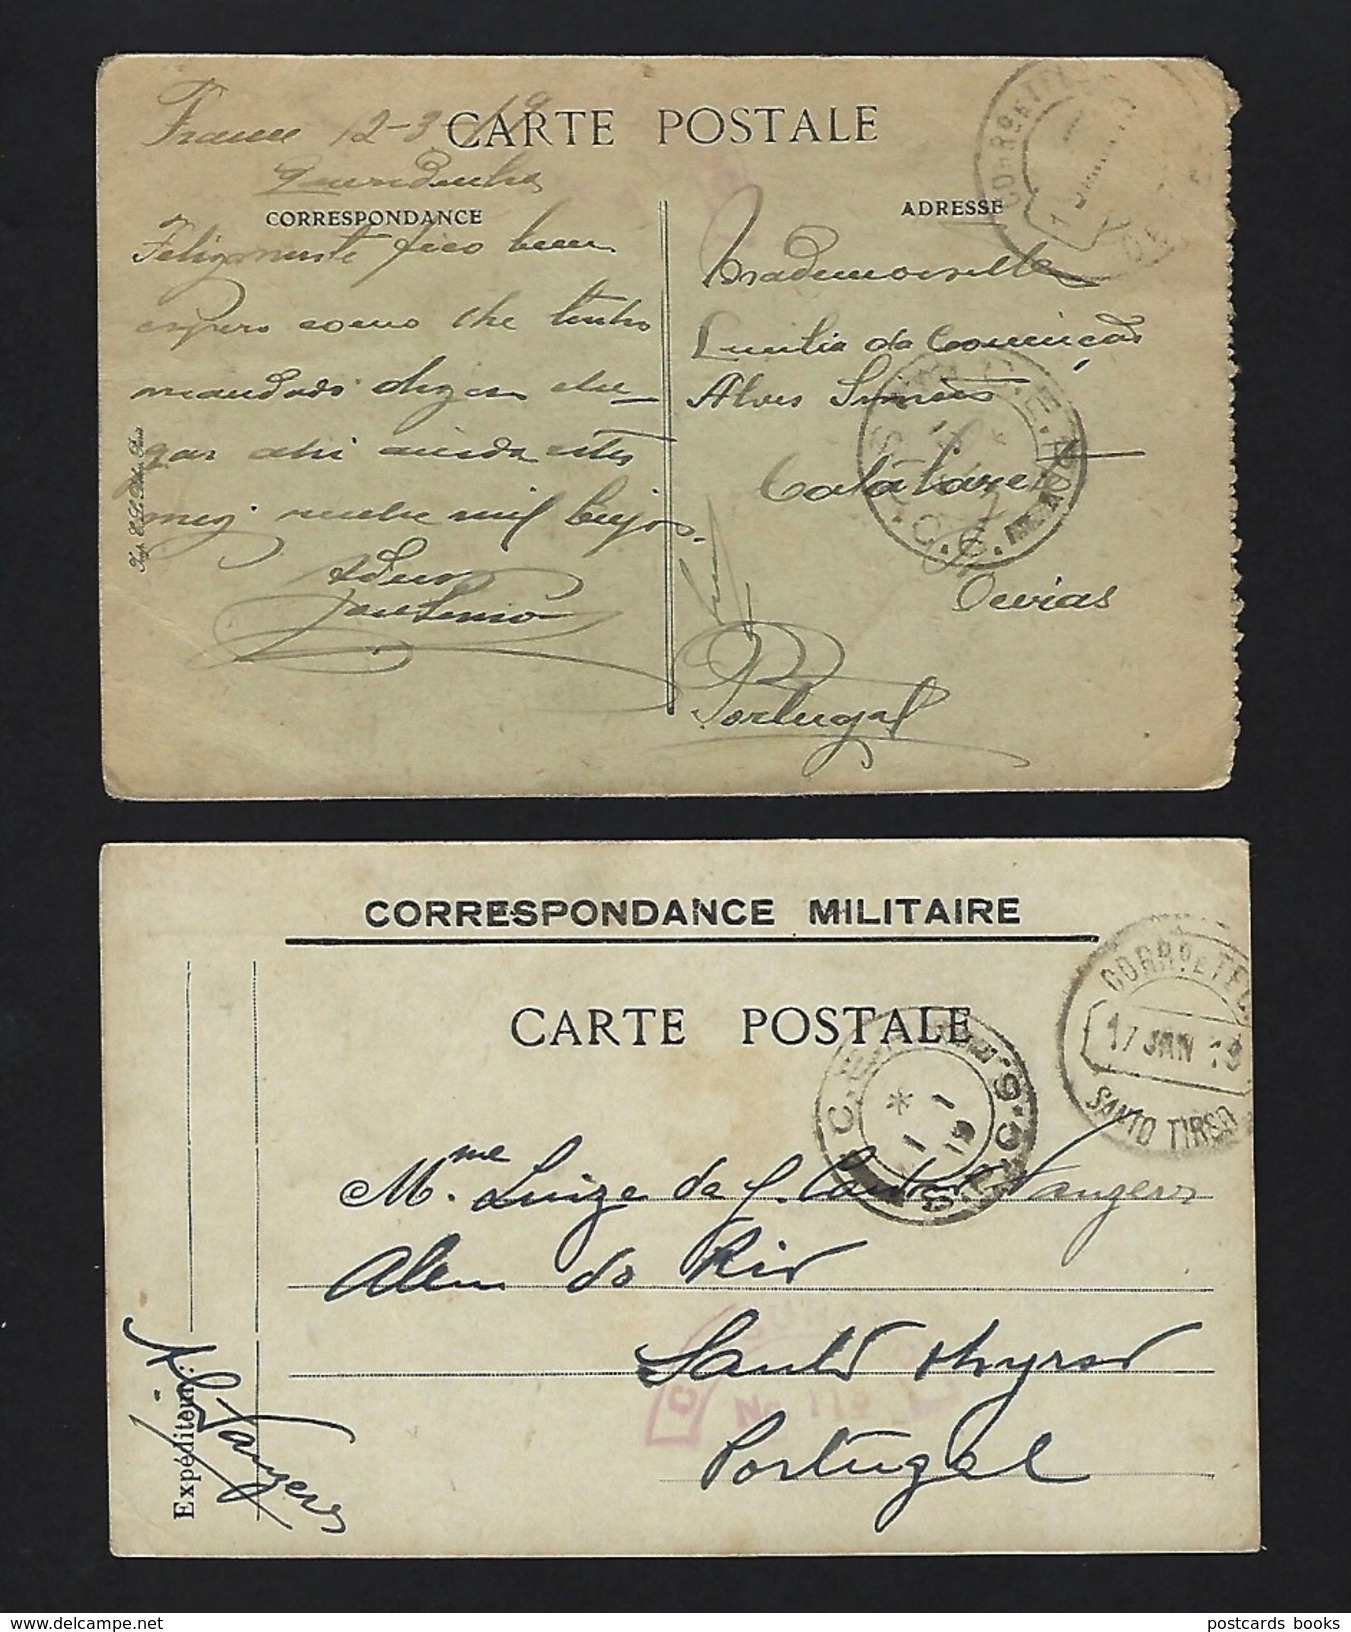 Set 2 Carte Postales CORRESPONDANCE MILITAIRE. Cancel CENSURA + CEP. Stampless WWI Ww1 War Military Mail 1917 + 1919 - Poststempel (Marcophilie)